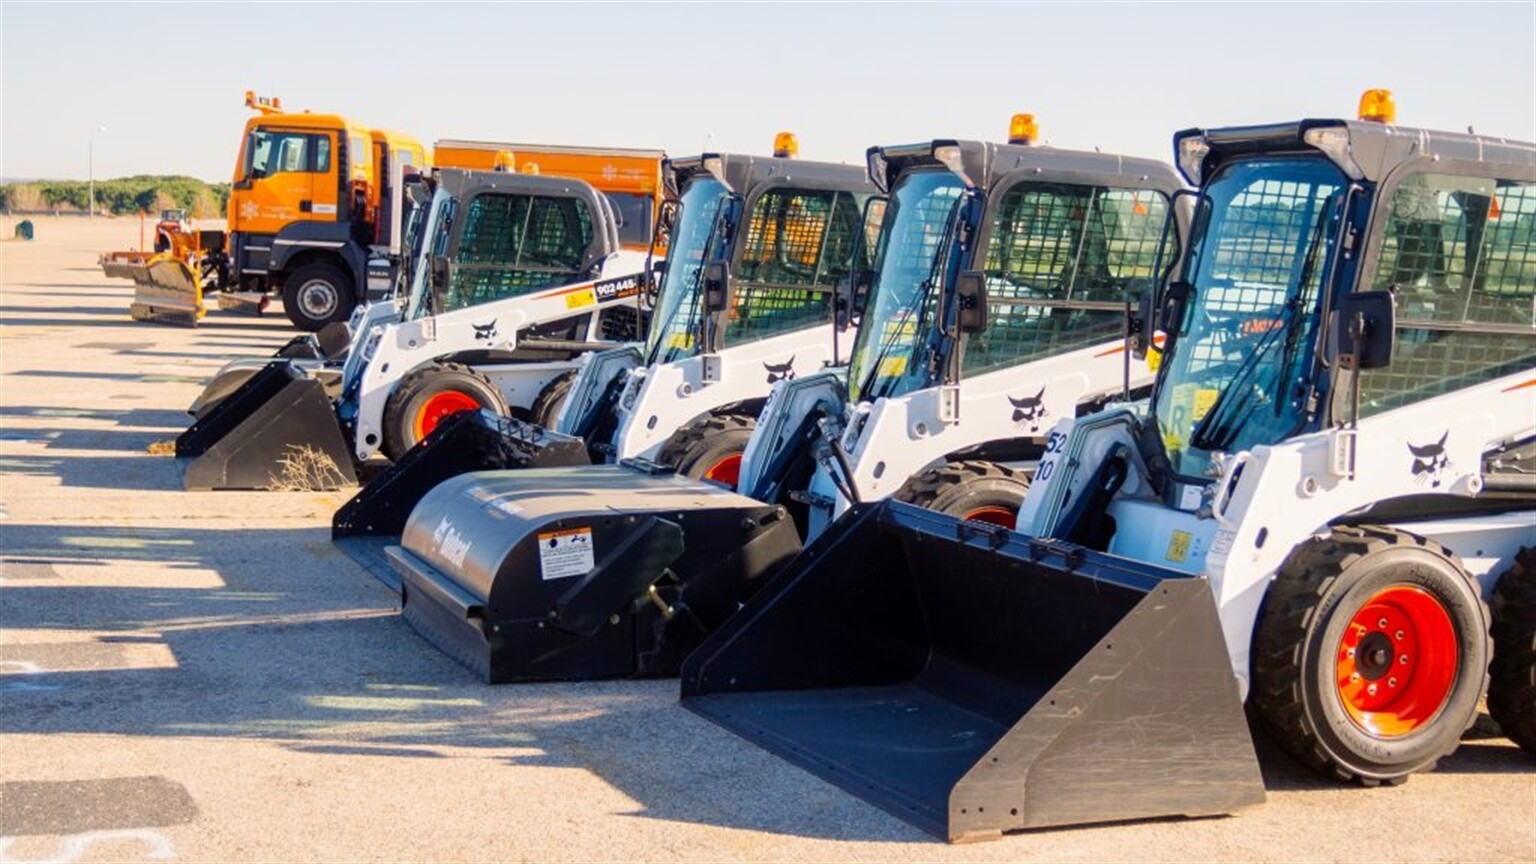 Madrid Airport Gears up for Winter with new Bobcat's